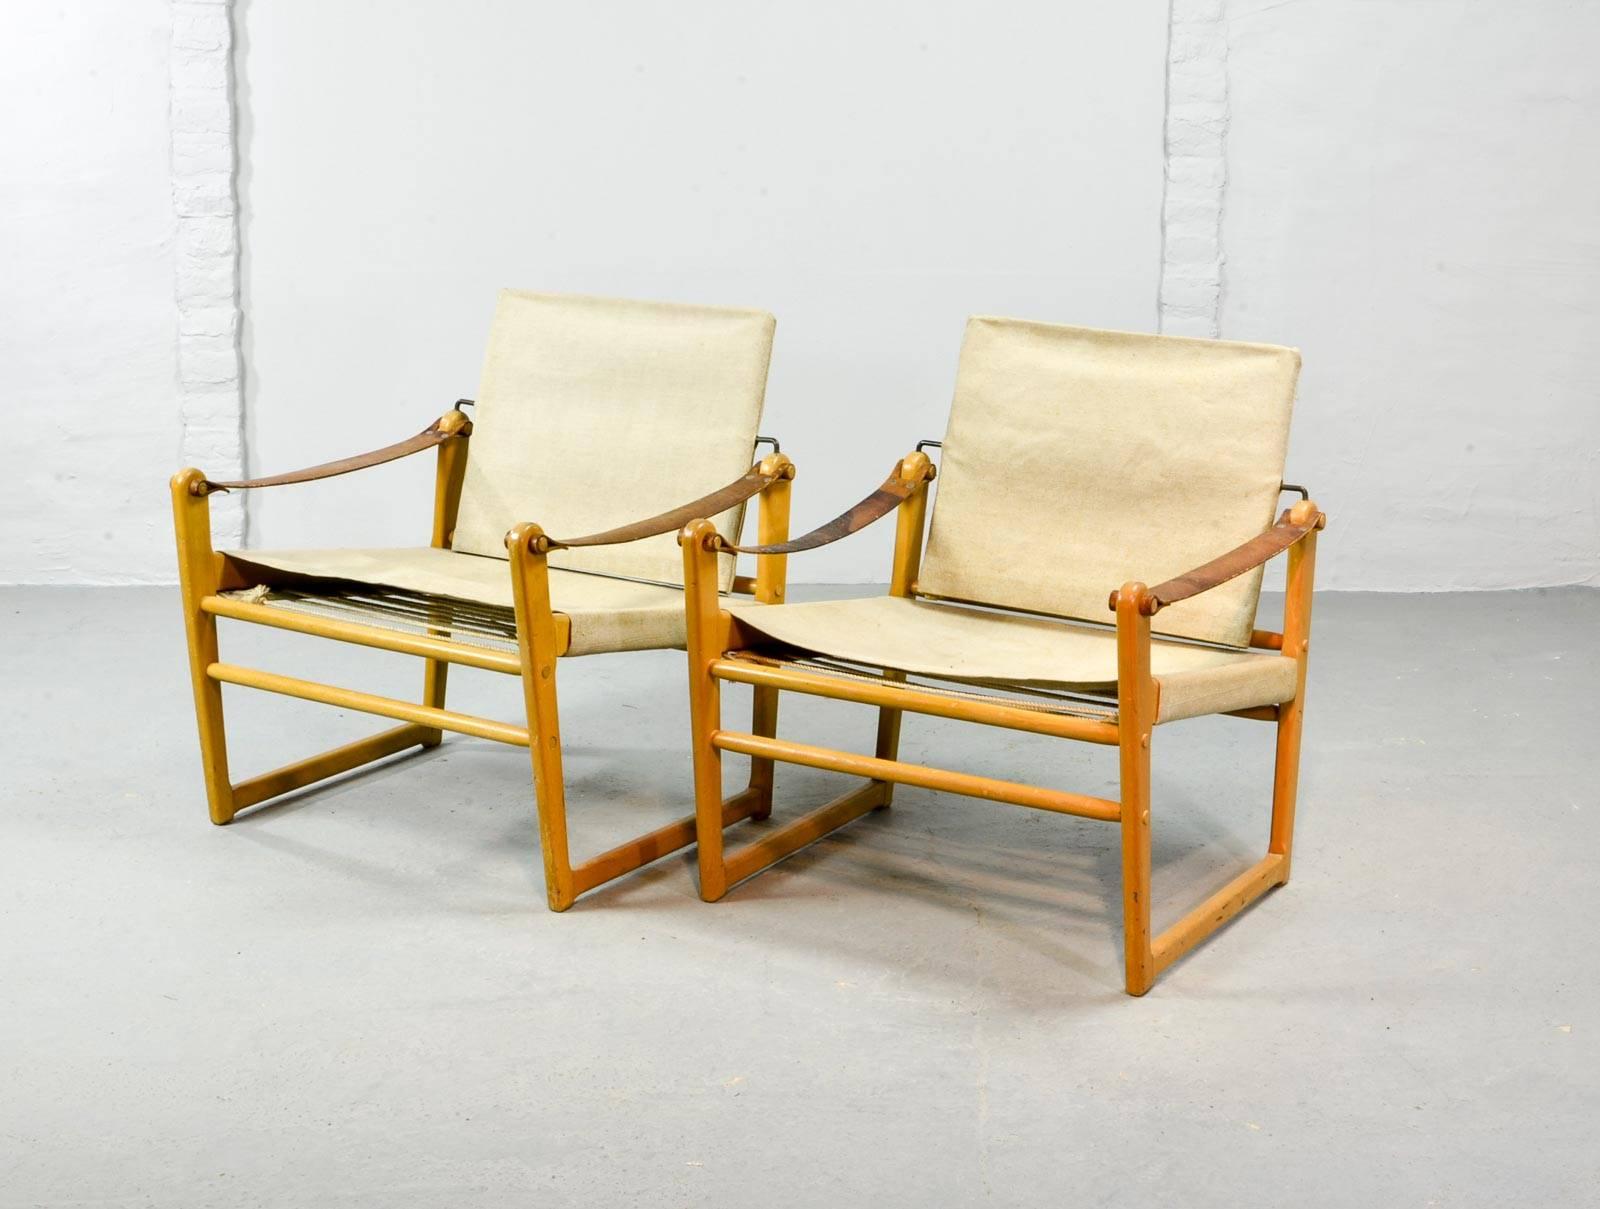 Midcentury Swedish pair of safari chairs designed by Bengt Ruda for Ikea in the 1960s. The beech wooden frame is upholstered with a canvas seat and backrest and features nice thick leather arm rests. The set is very well preserved with minor wear